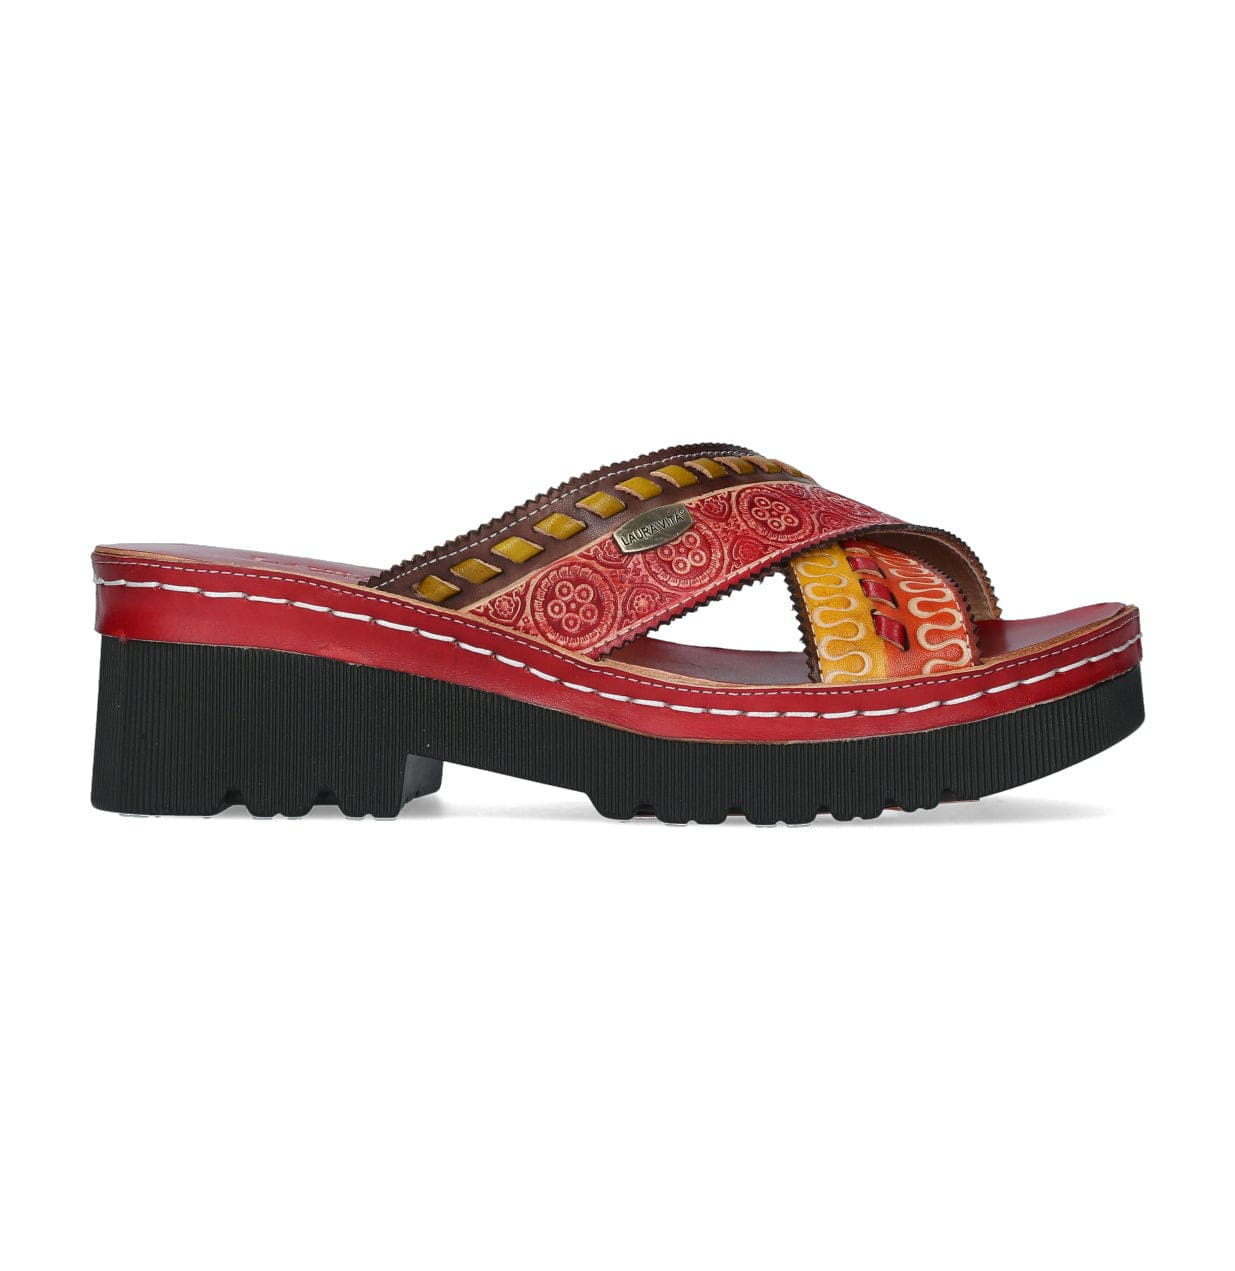 LEXIAO 09 shoes - 35 / Red - Mule